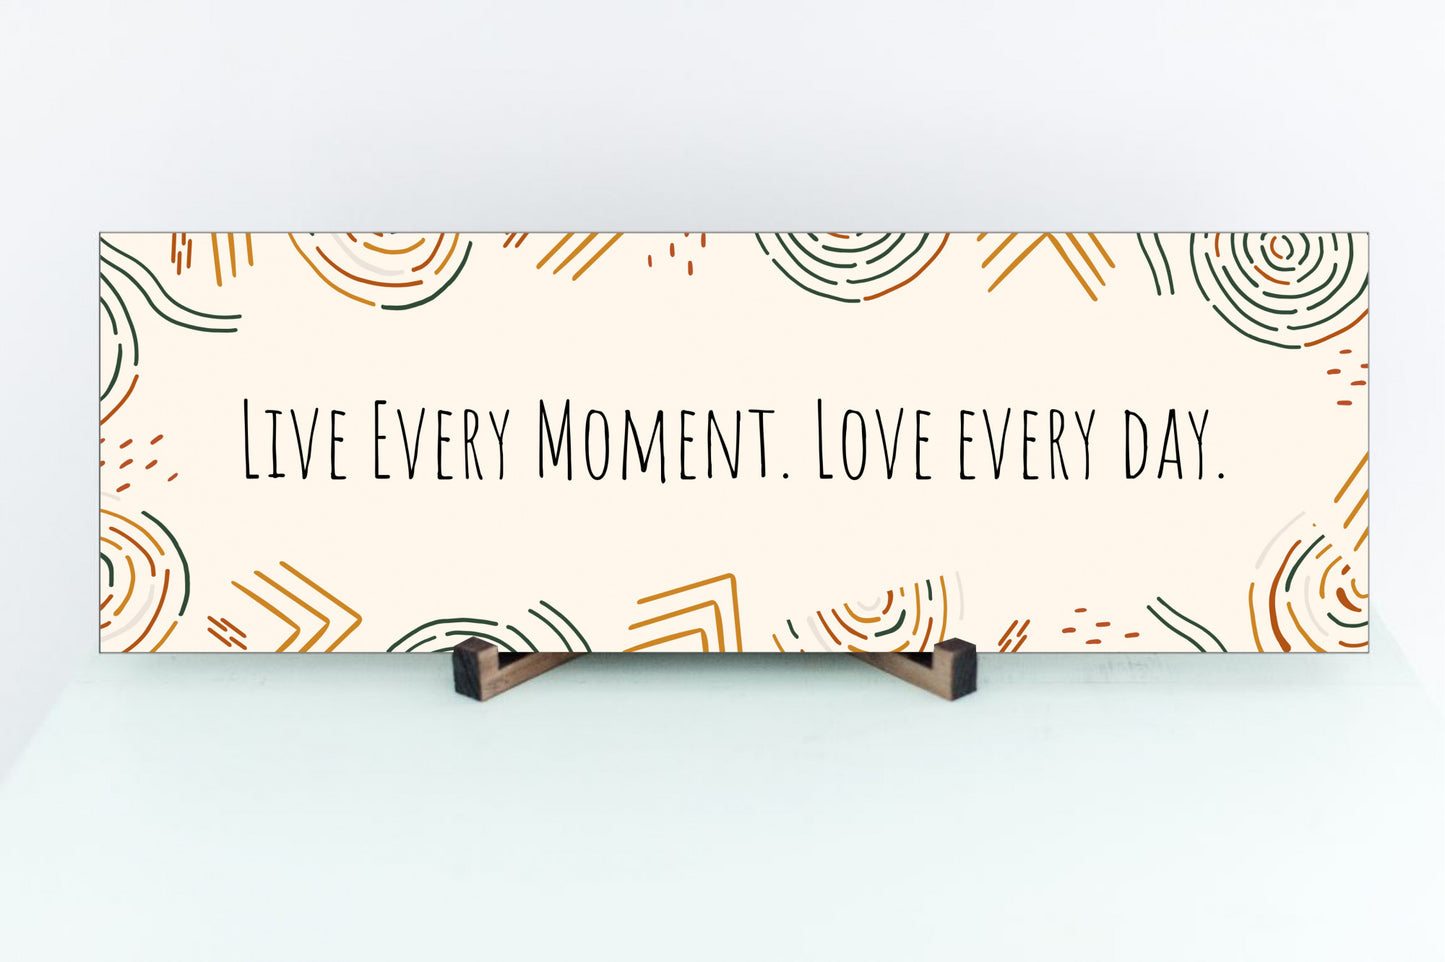 Live Every Moment. Love Every Day. Inspiring Wall Sign or Table Display